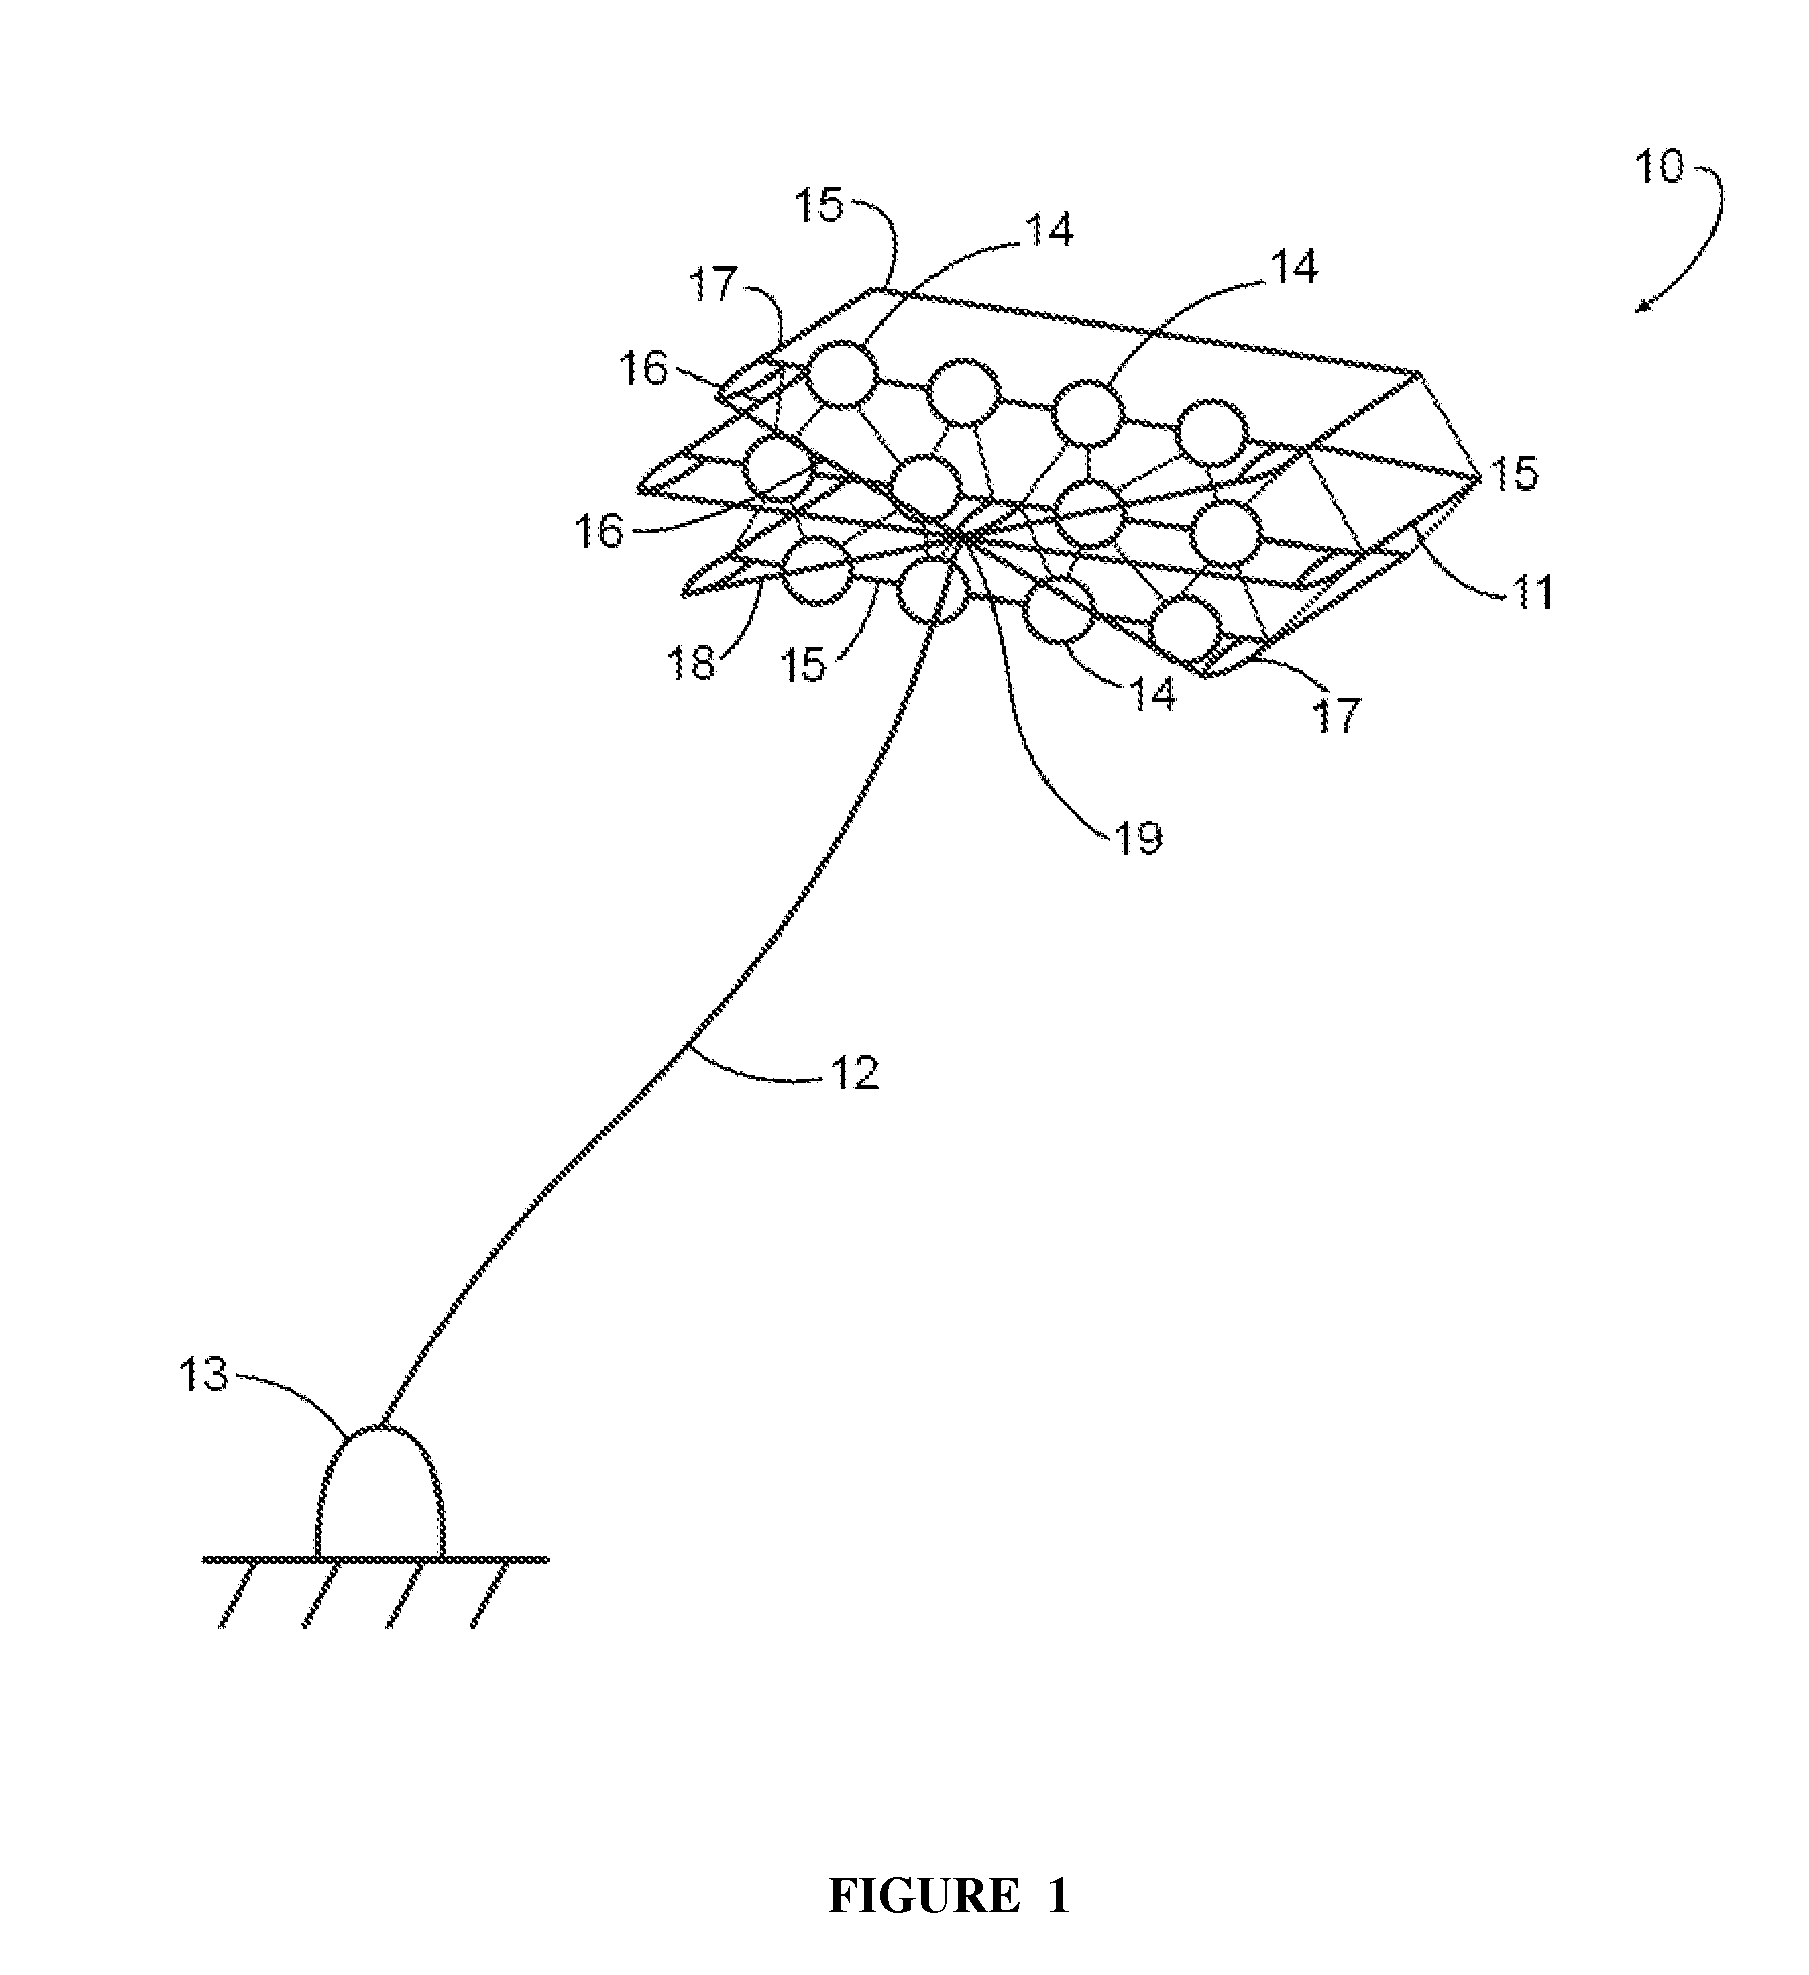 Airborne Power Generation System With Modular Structural Elements